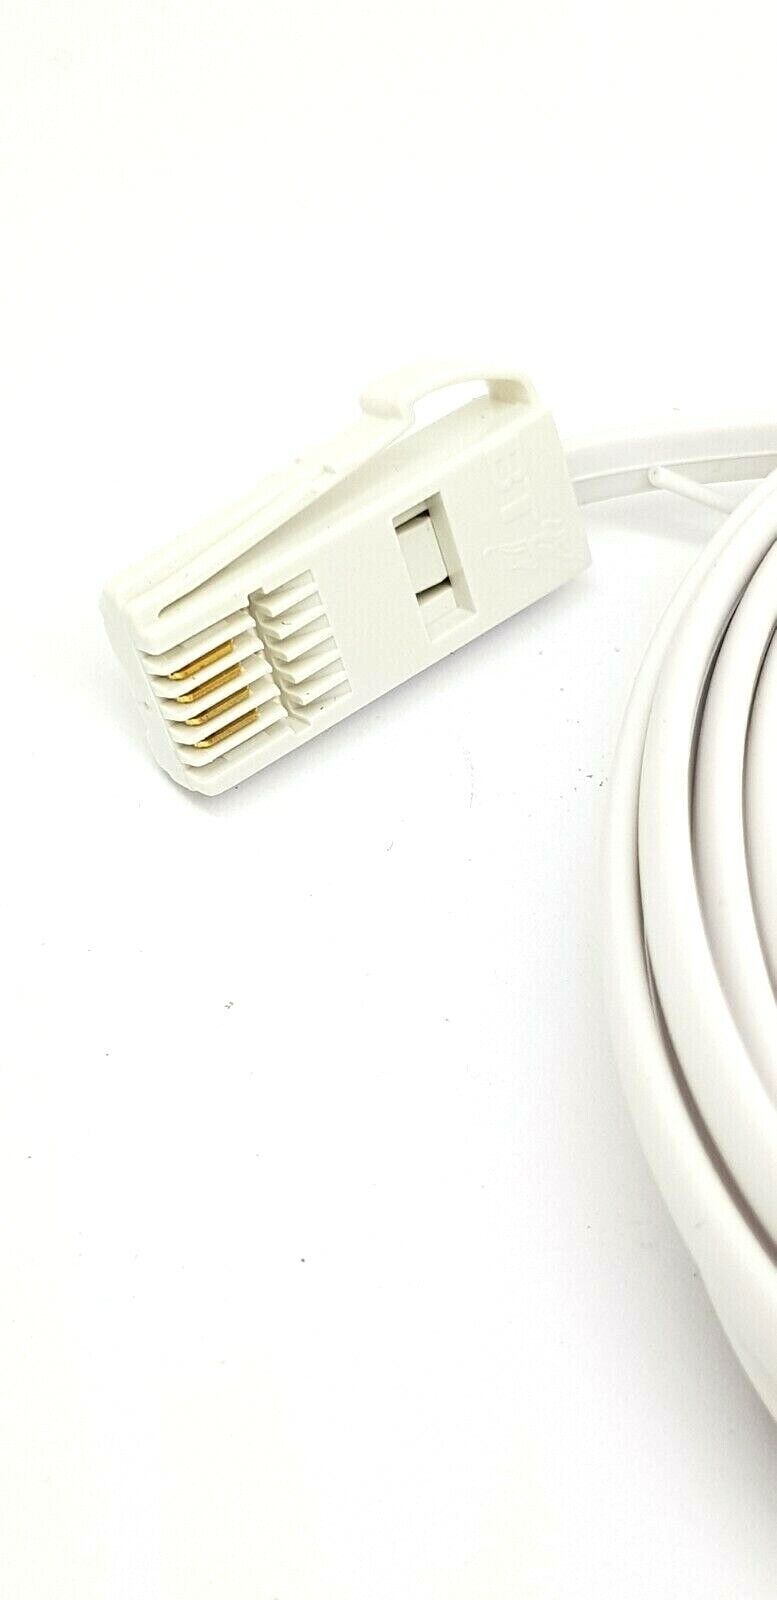 15m Telephone Extension Lead Cable HQ Flat Slimline Phone Line BT Virgin Fax